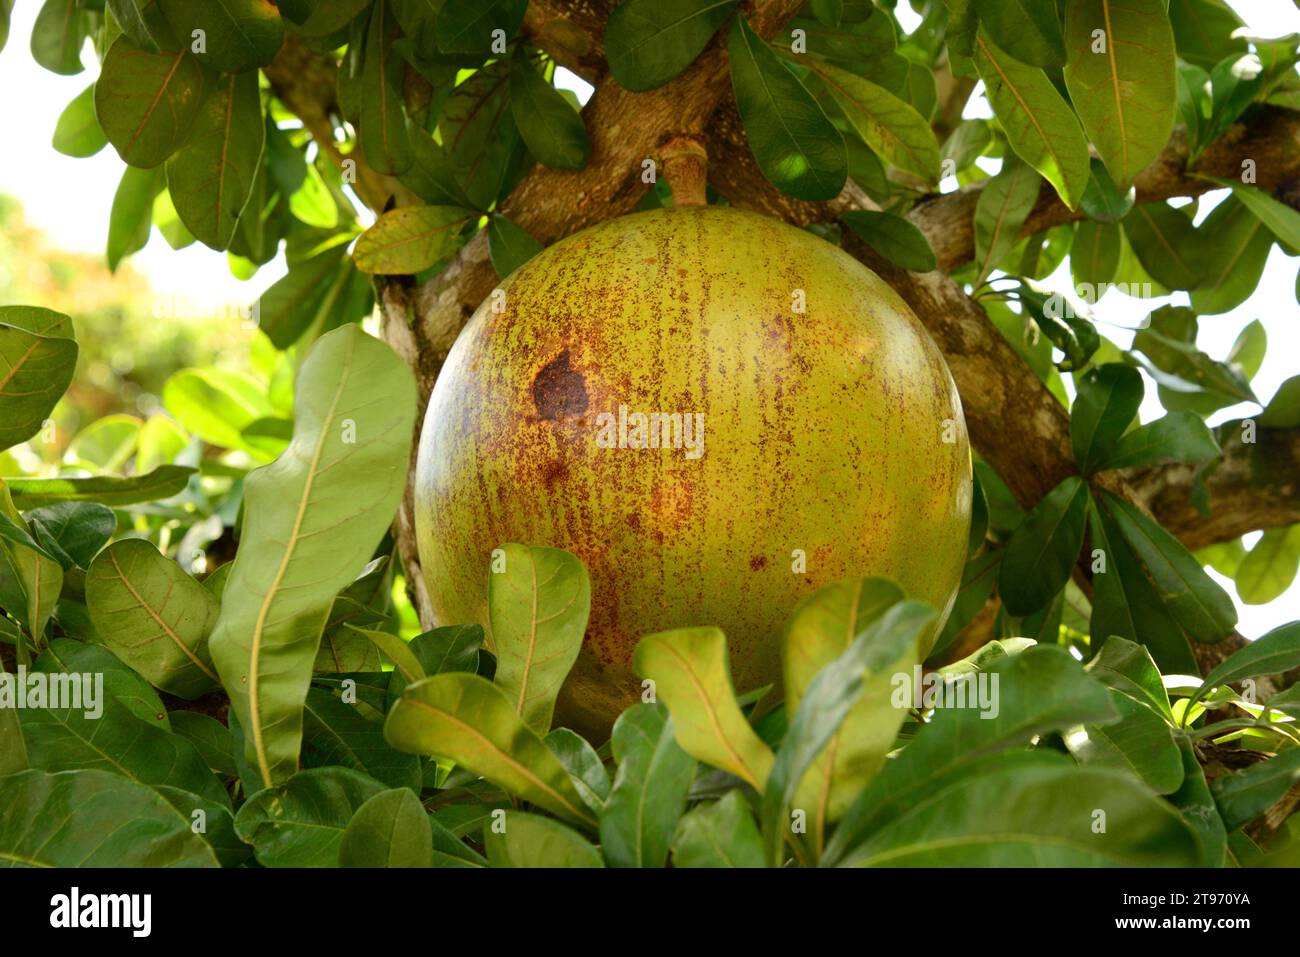 Calabash tree or cuite (Crescentia cujete) is a tree that produce very big fruits calleds bule, guaje, jicara or tecomate. The fruit is used to make c Stock Photo